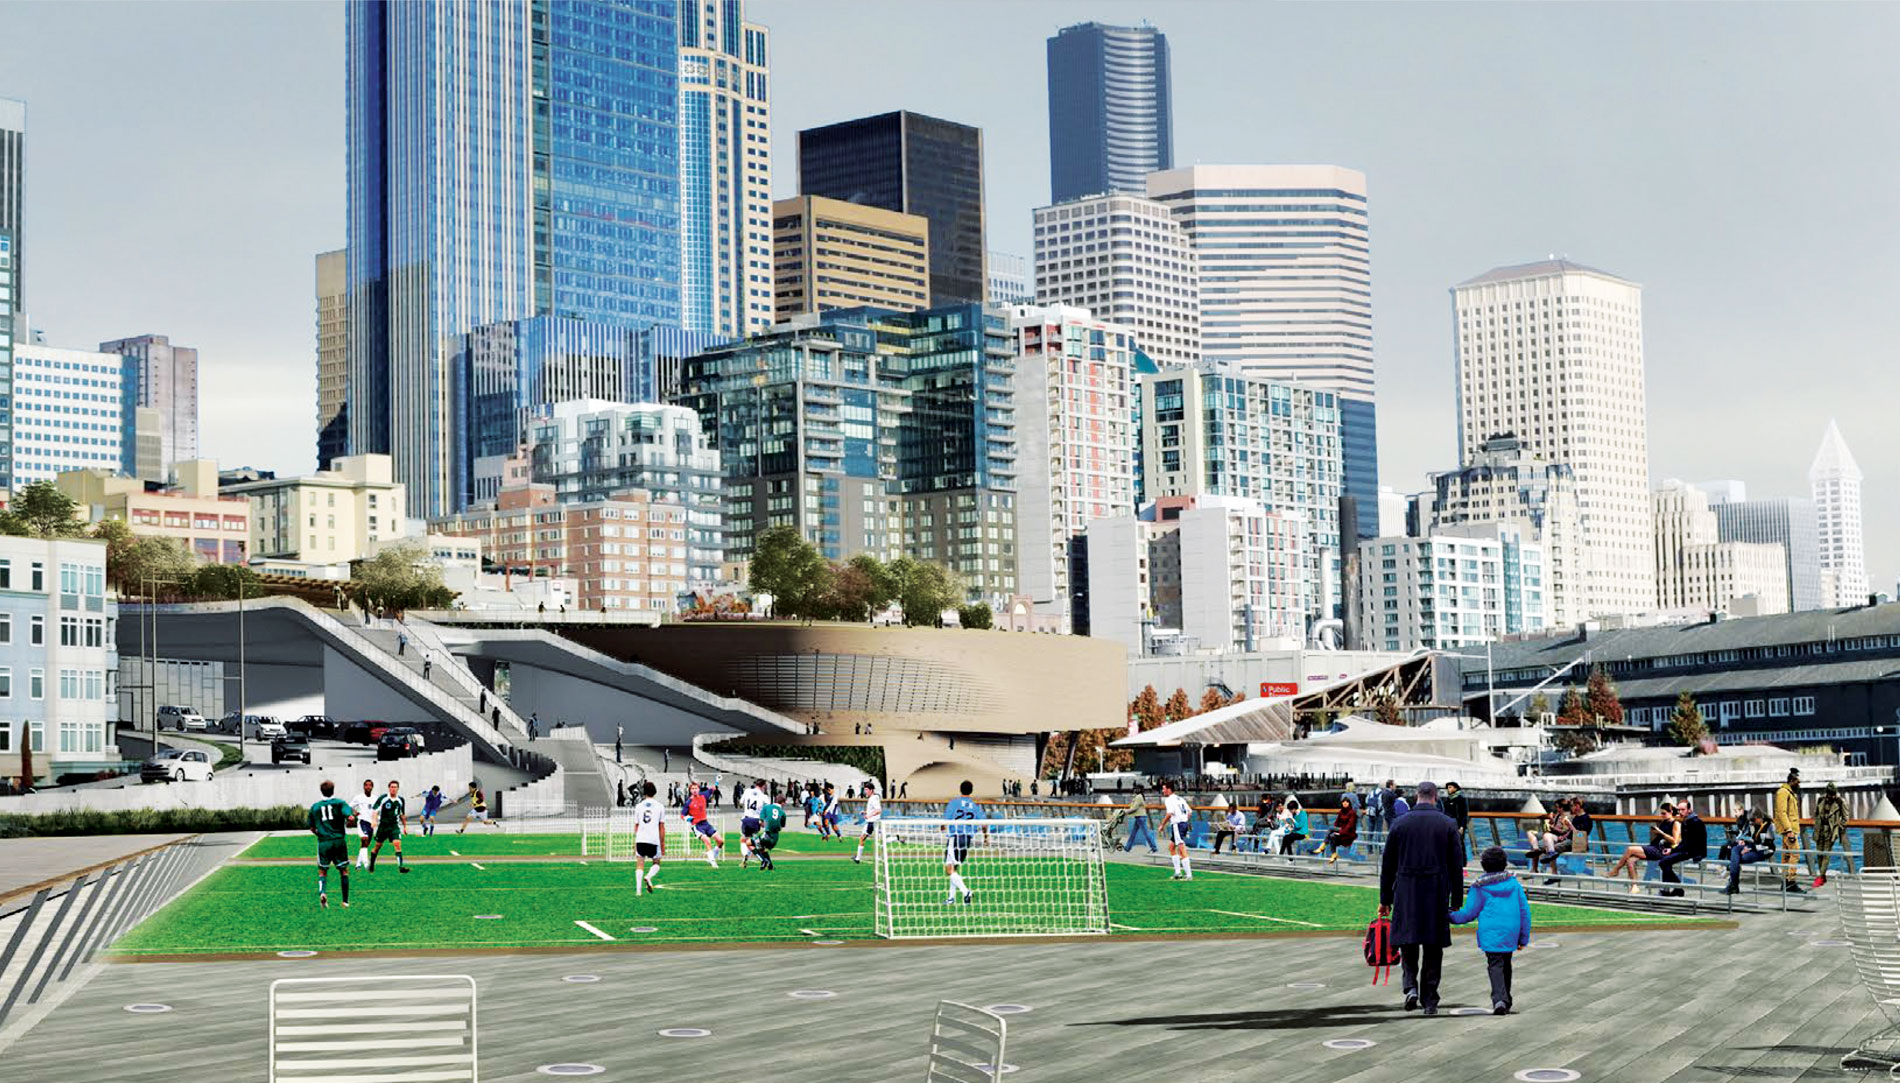 An illustration of Seattle's redeveloped waterfront featuring a soccer pitch on a dock with the skyline behind it